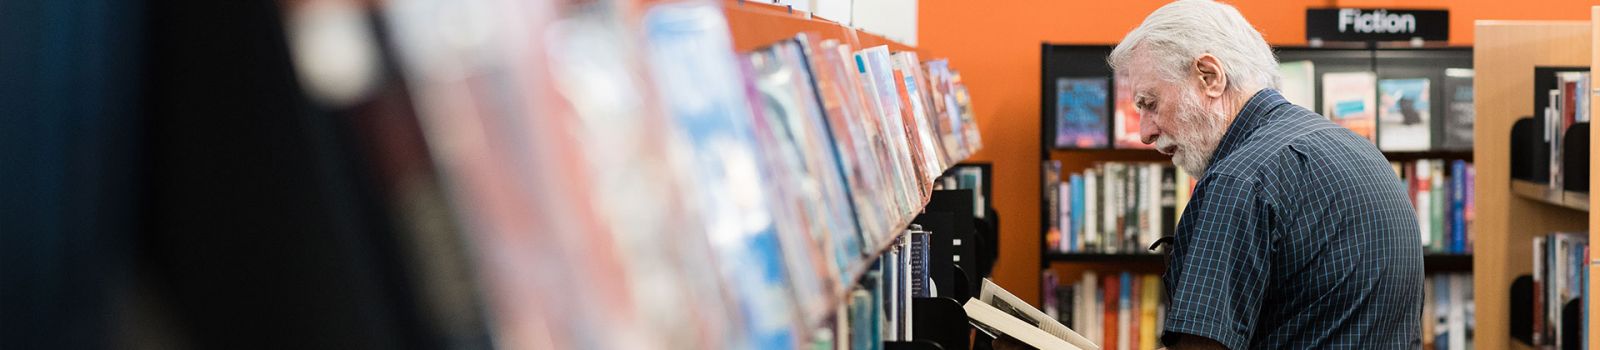 A man looking at a row of books in our library banner image